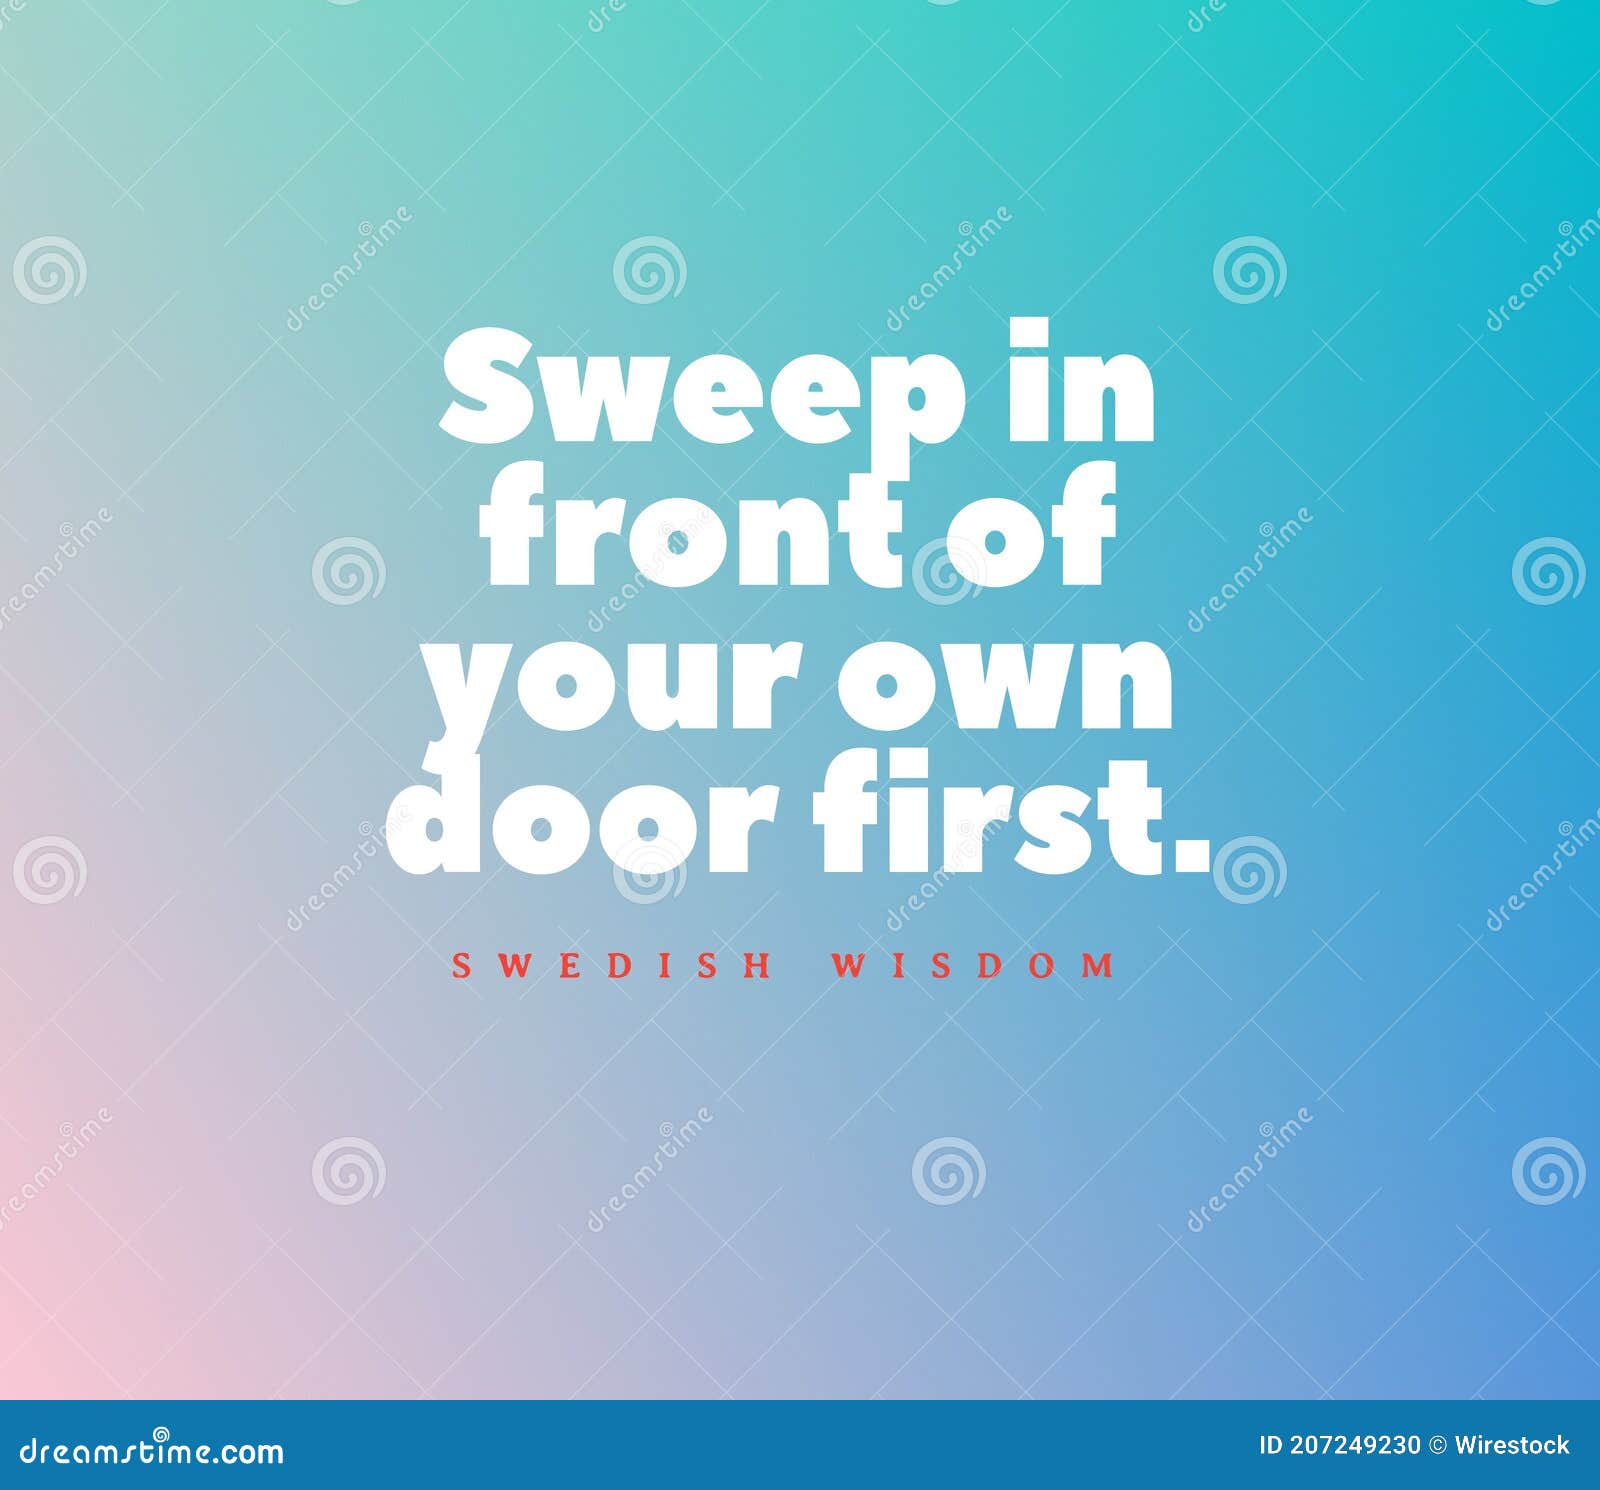 Swedish Quote On A Blue Background - Sweep In Front Of Your Own Door First Stock Illustration - Illustration Of Typography, Door: 207249230